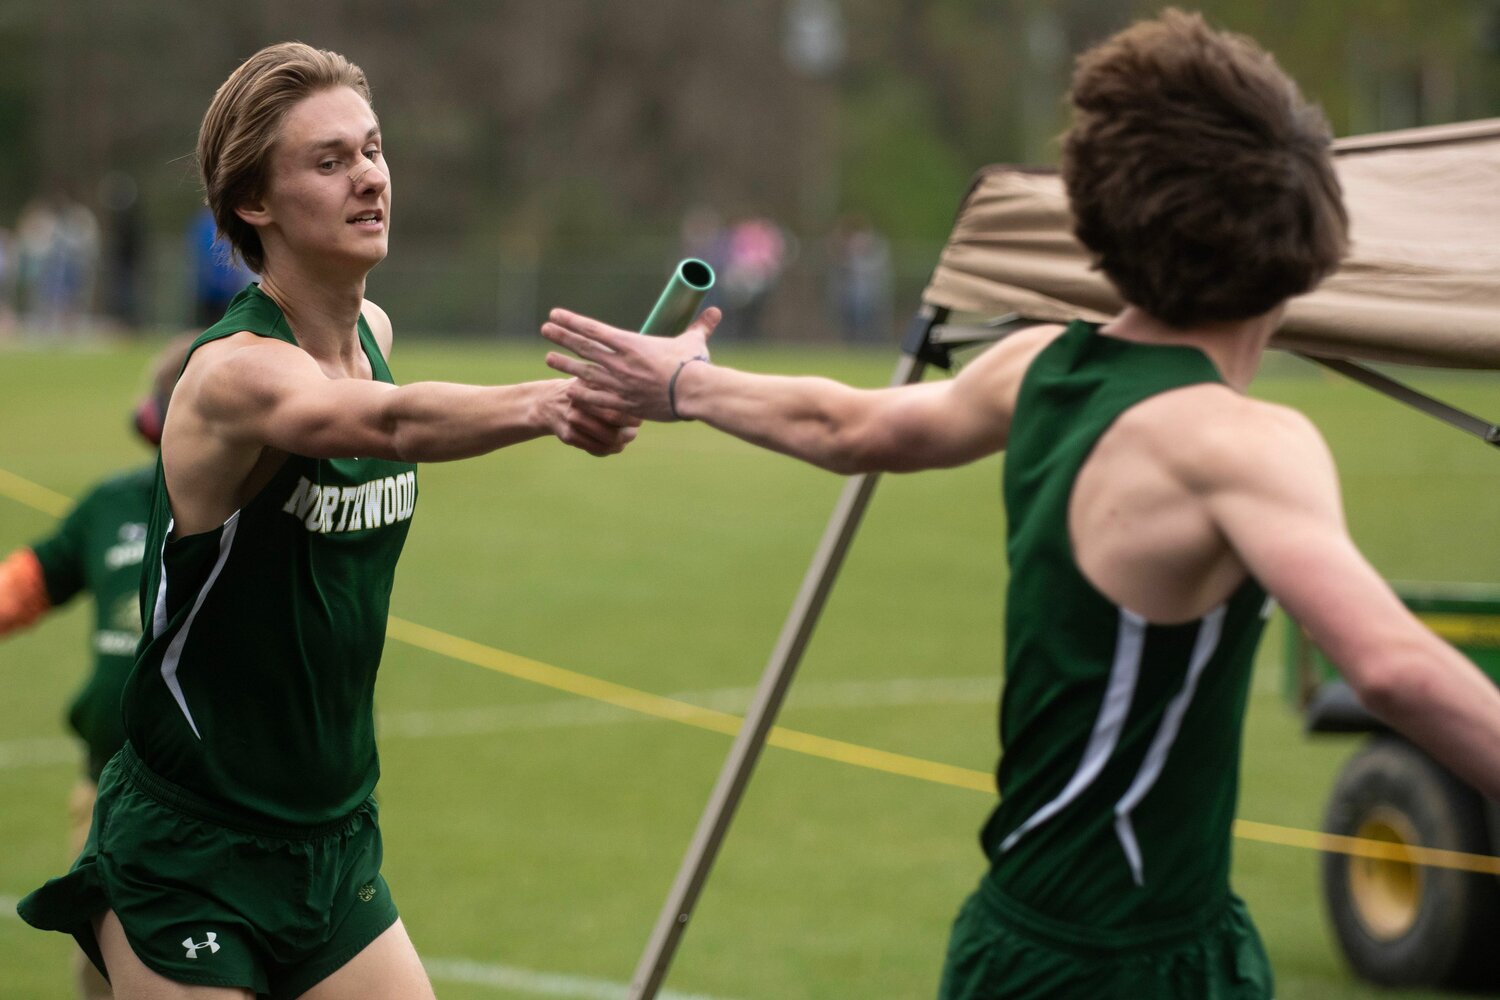 Northwood's Jackson Adams (left) hands the baton to his teammate during a relay event at the Chatham County track and field championships.